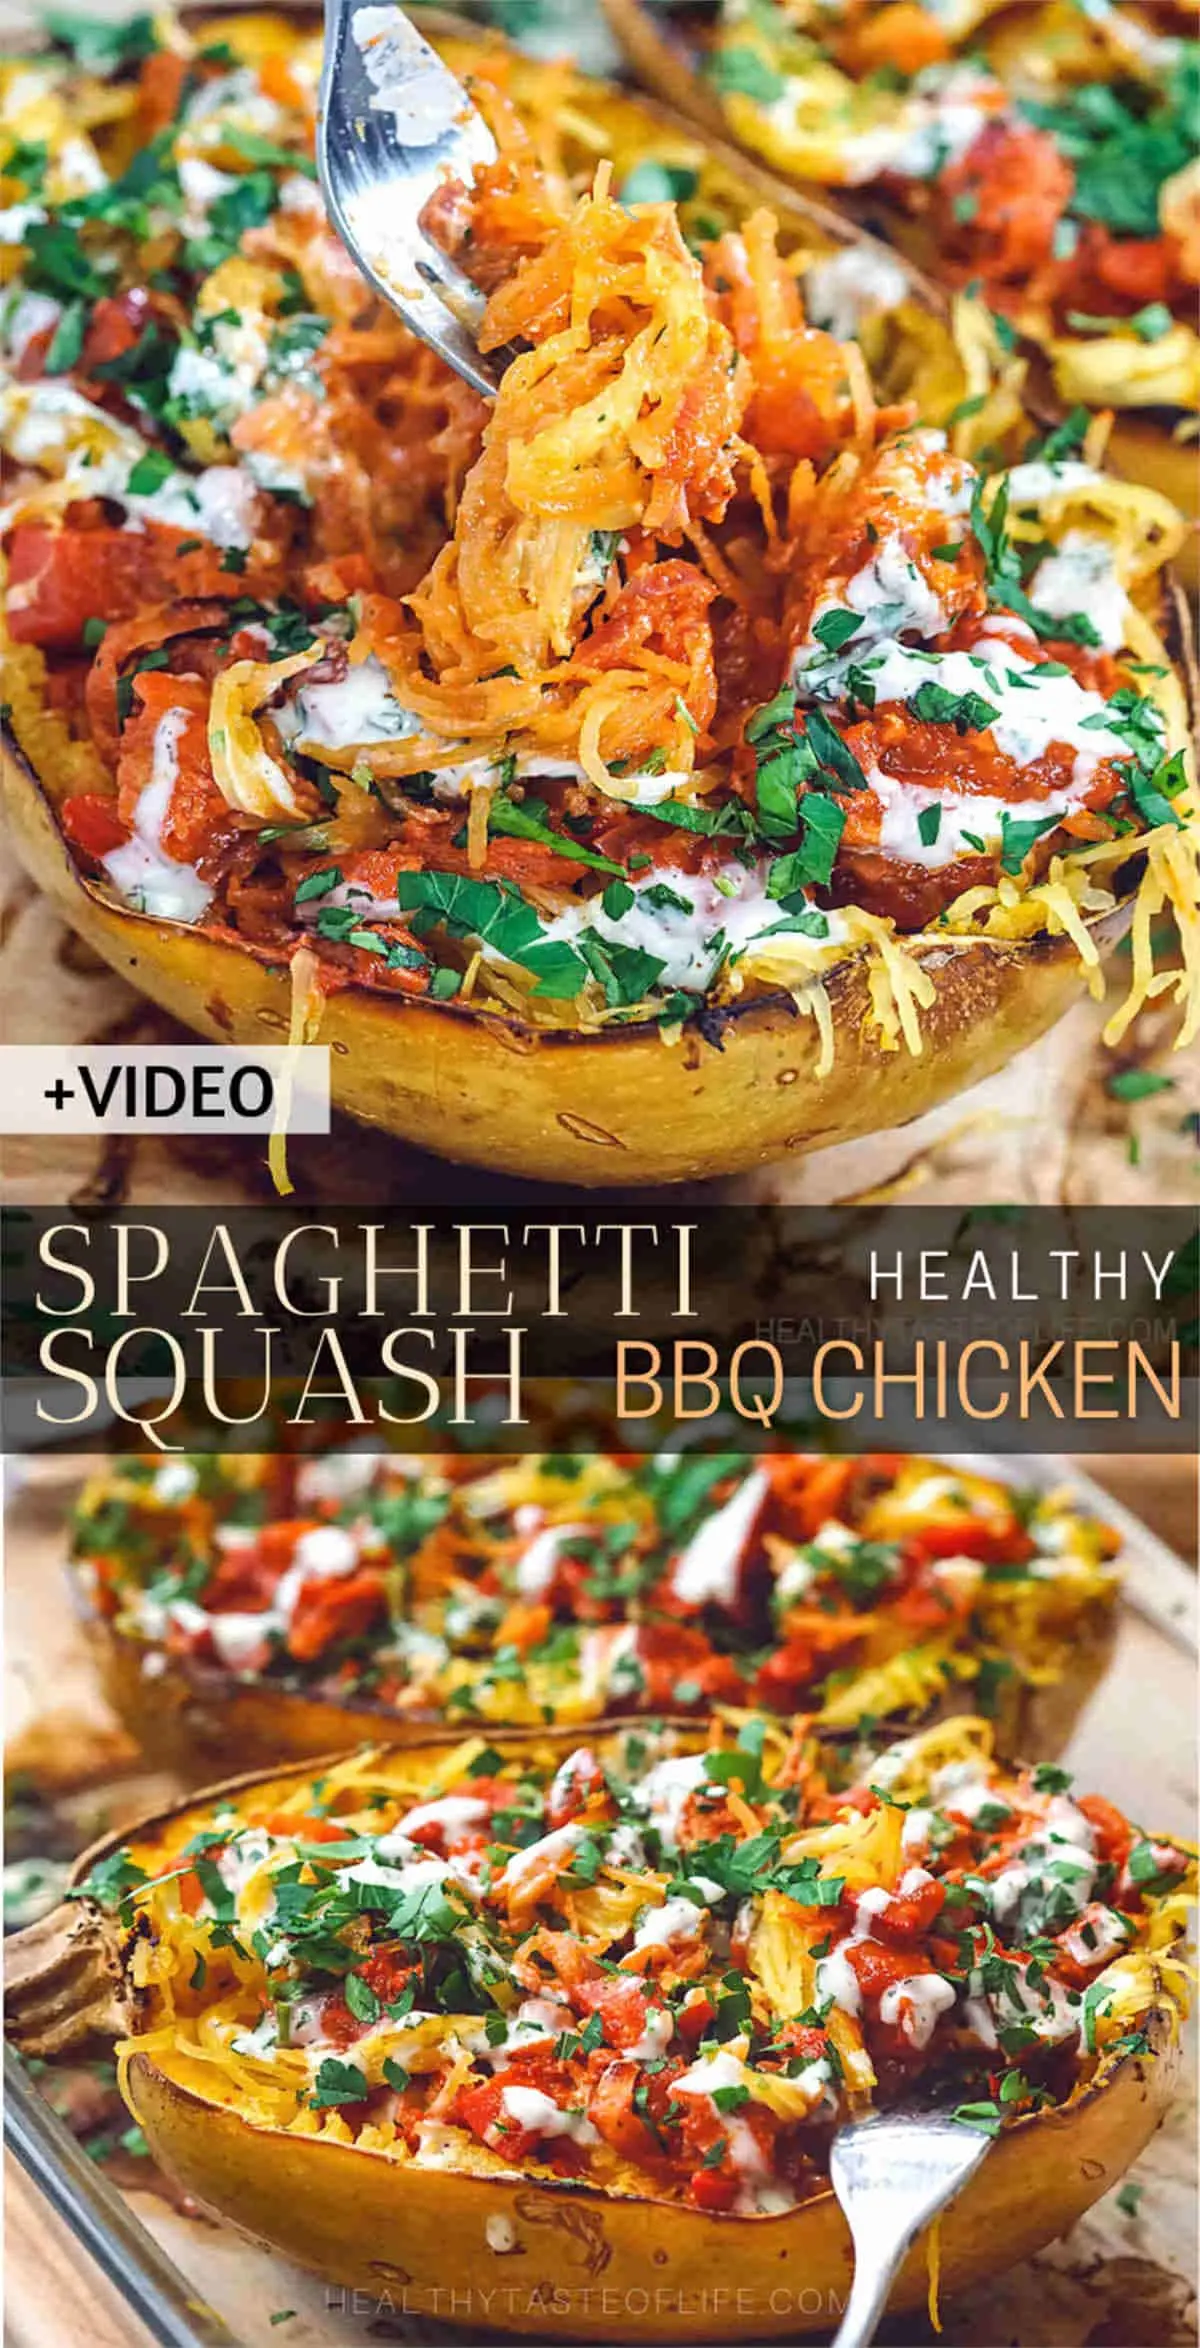 Looking for healthy spaghetti squash recipes with chicken? This healthy chicken spaghetti squash recipe is also low carb, dairy free, gluten free, whole30, paleo and easy to prepare. The sauce complements the baked spaghetti squash beautifully giving it a sweet and tangy flavor. Enjoy as it is, in a bowl or transform into a casserole . See video tutorial. #healthyspaghettisquash #spaghettisquashrecipes #bakedspaghettisquash #chickenspaghettisquash #roastedpaghettisquash #dairyfreespaghettisquash